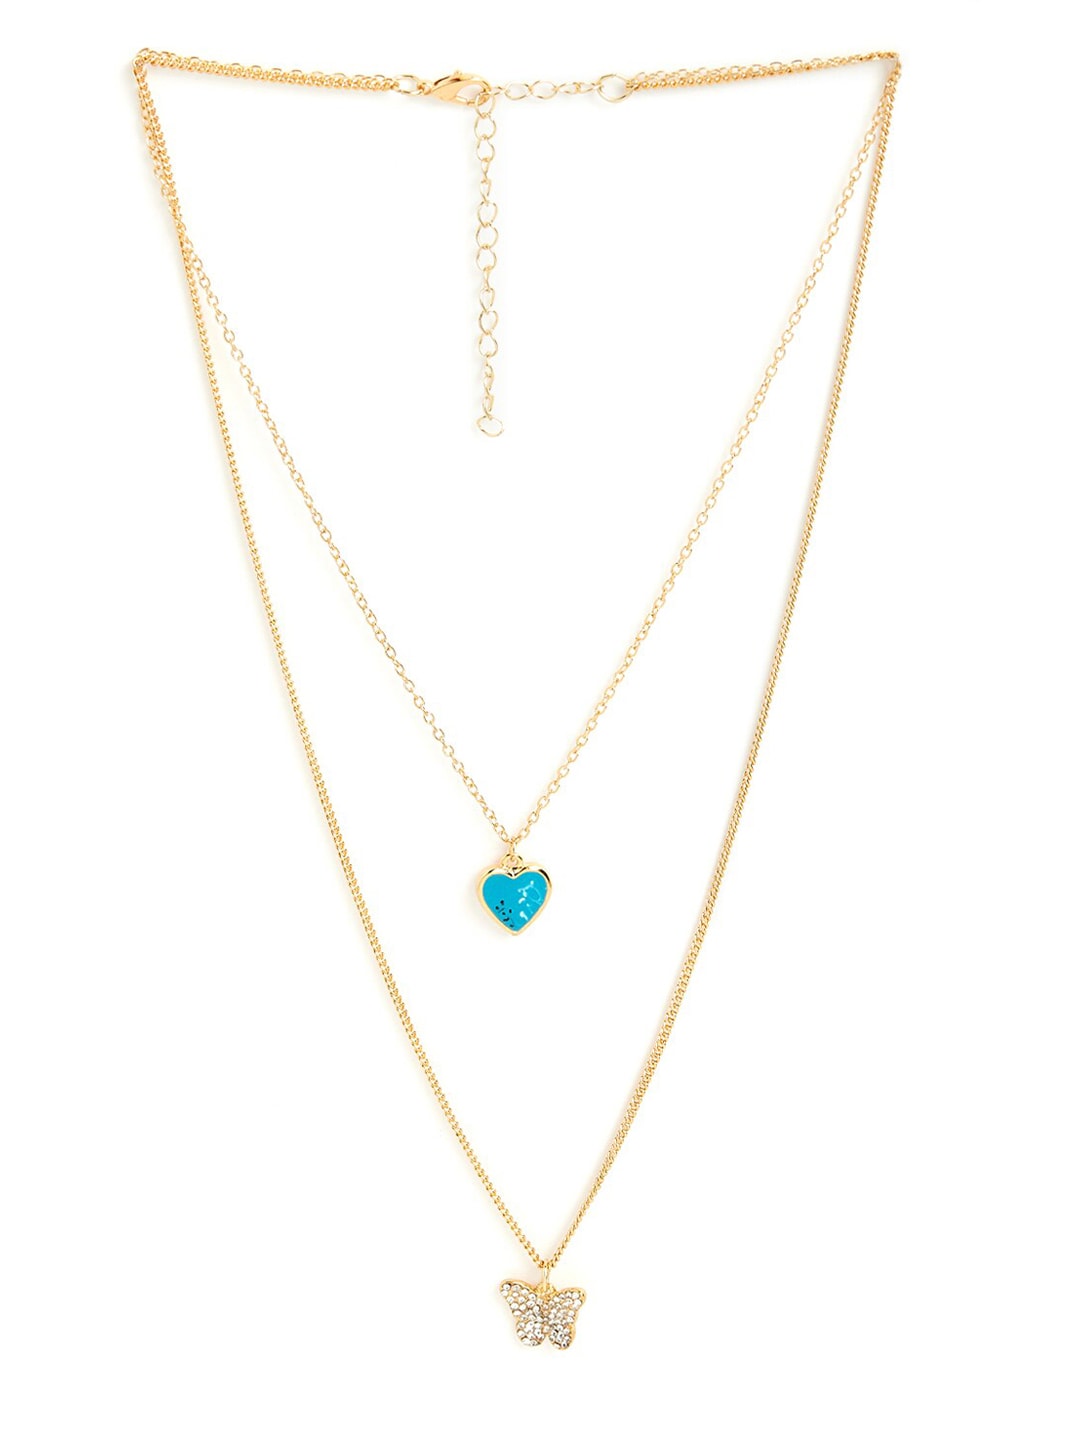 Lilly & sparkle Gold-Plated & Blue Gold-Plated Layered Necklace Price in India